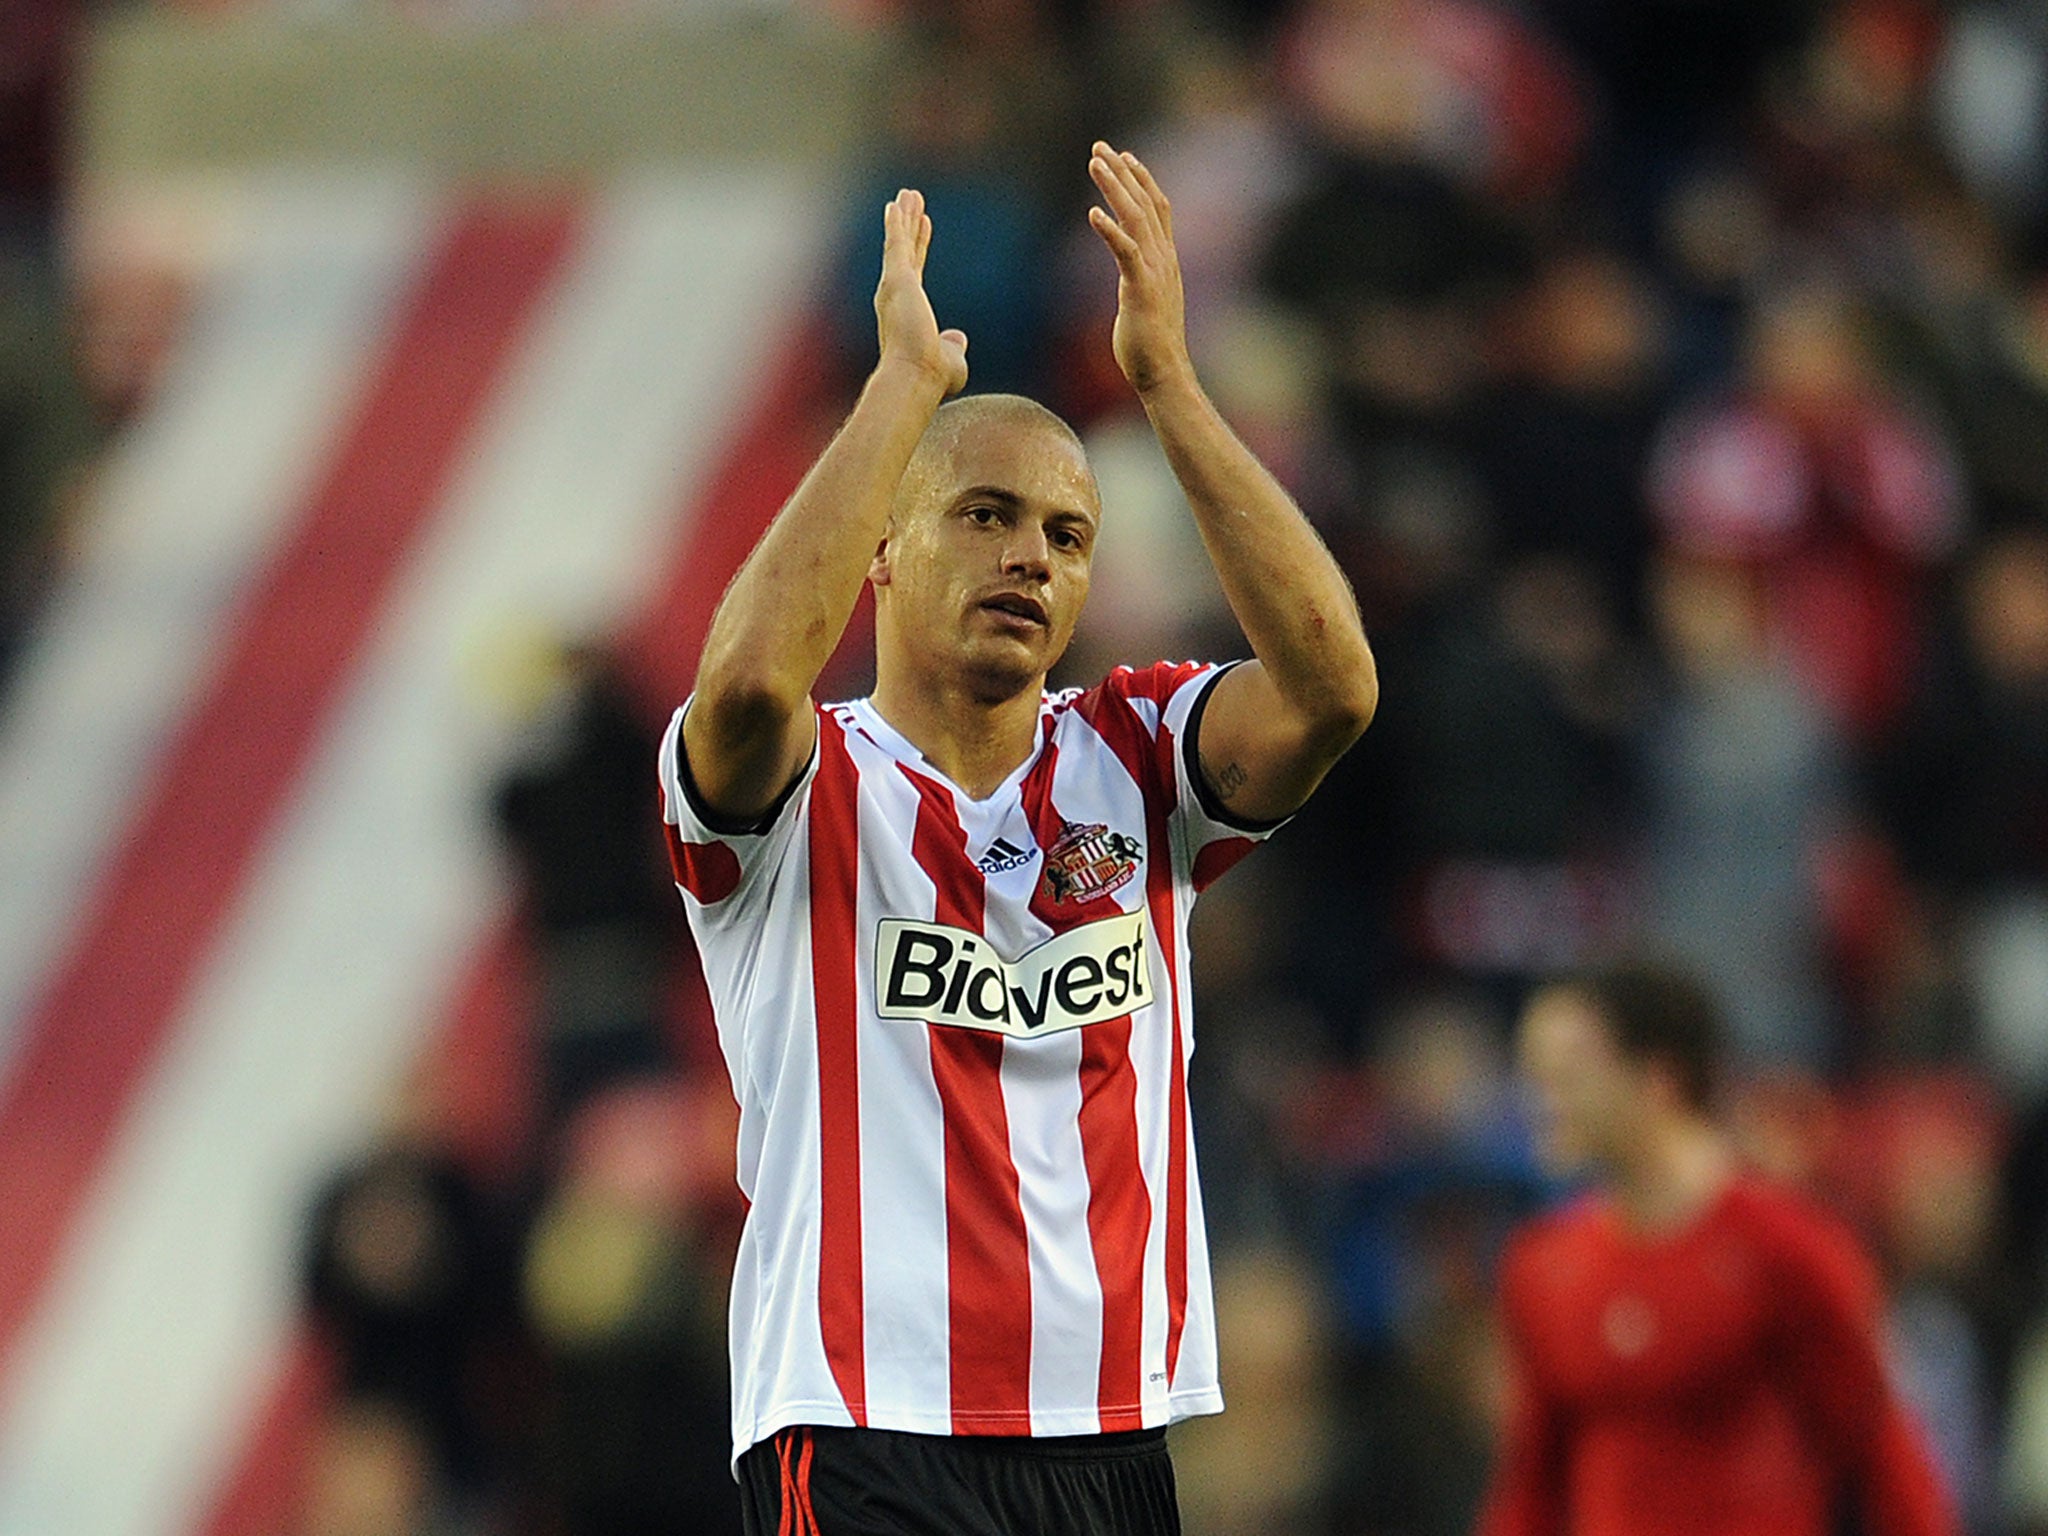 Sunderland defender Wes Brown has drawn praise from his manager Gus Poyet after his man-of-the-match performance against Manchester City